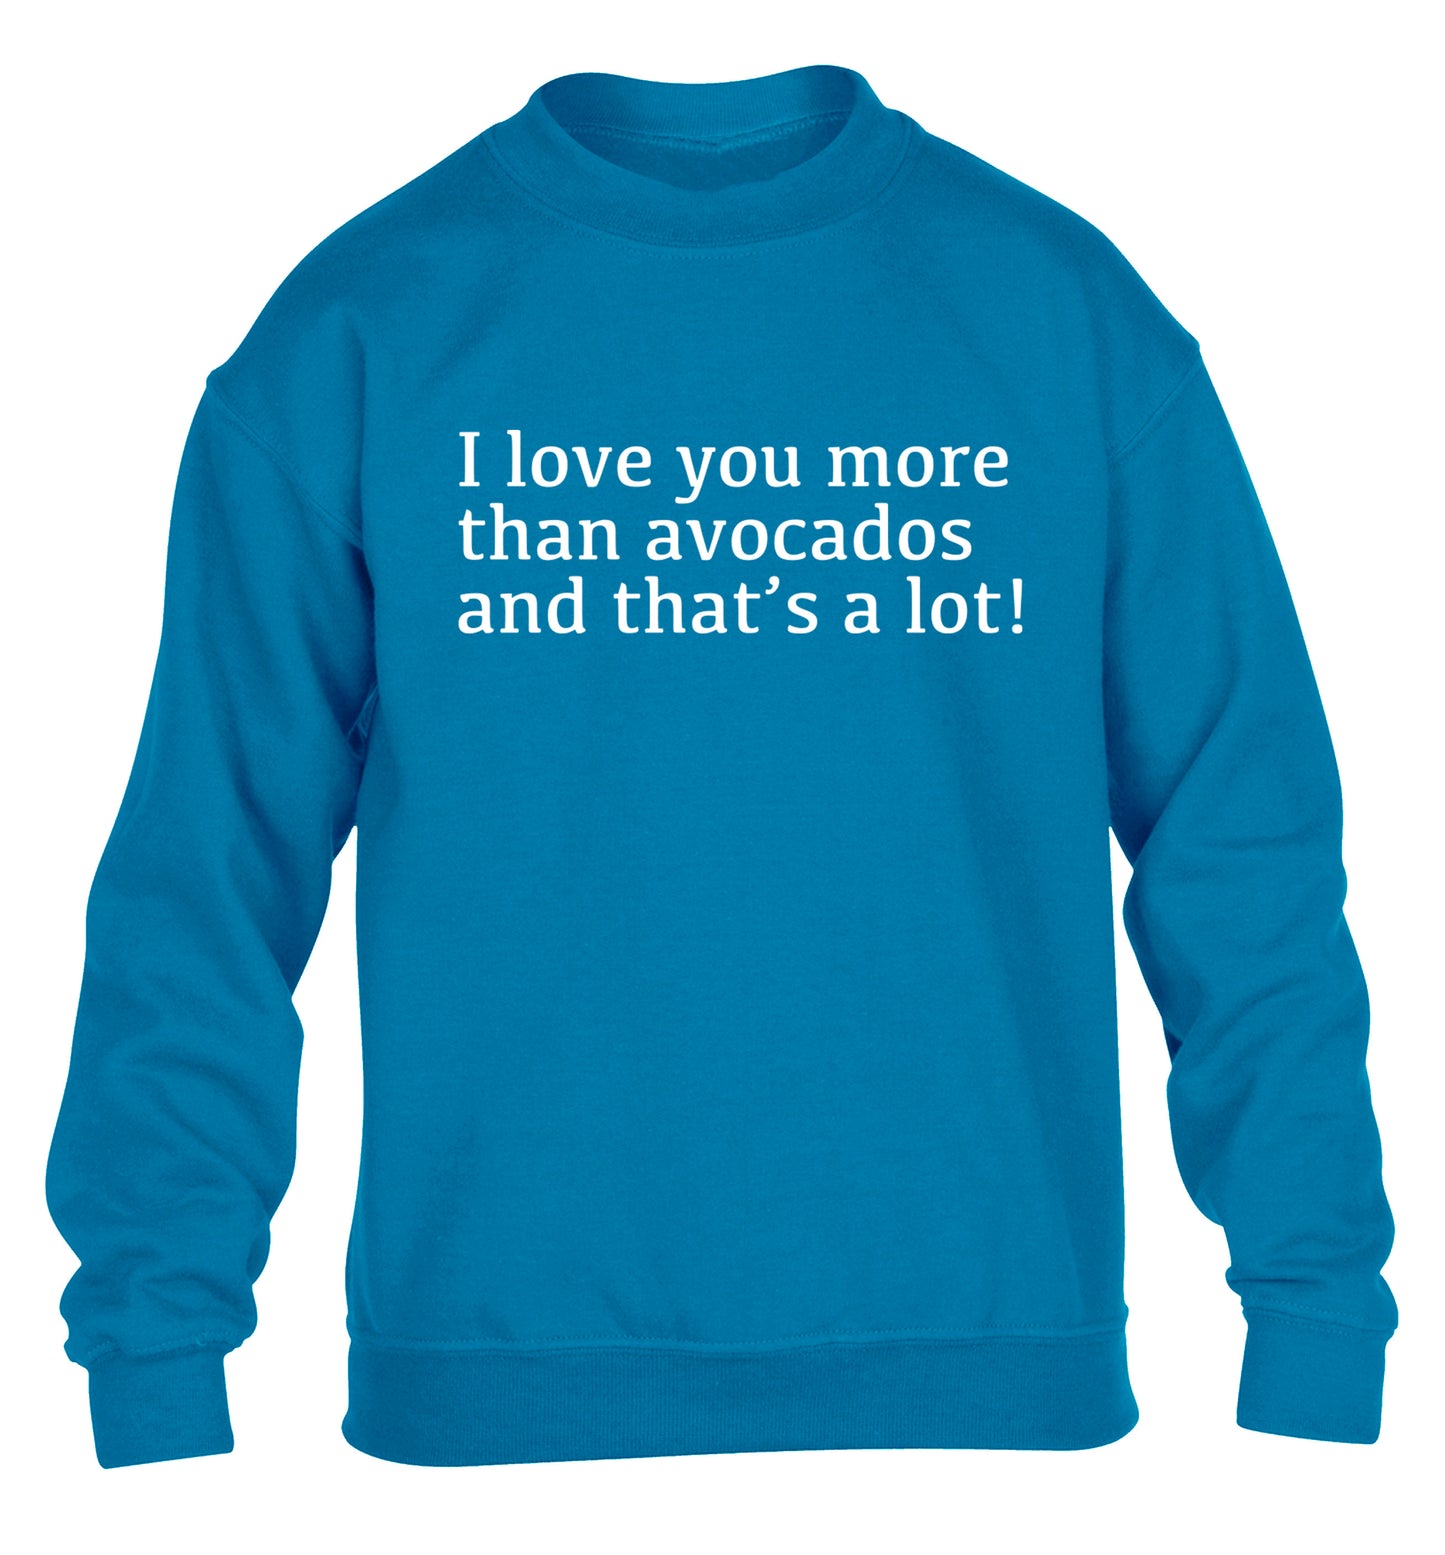 I love you more than avocados and that's a lot children's blue sweater 12-14 Years